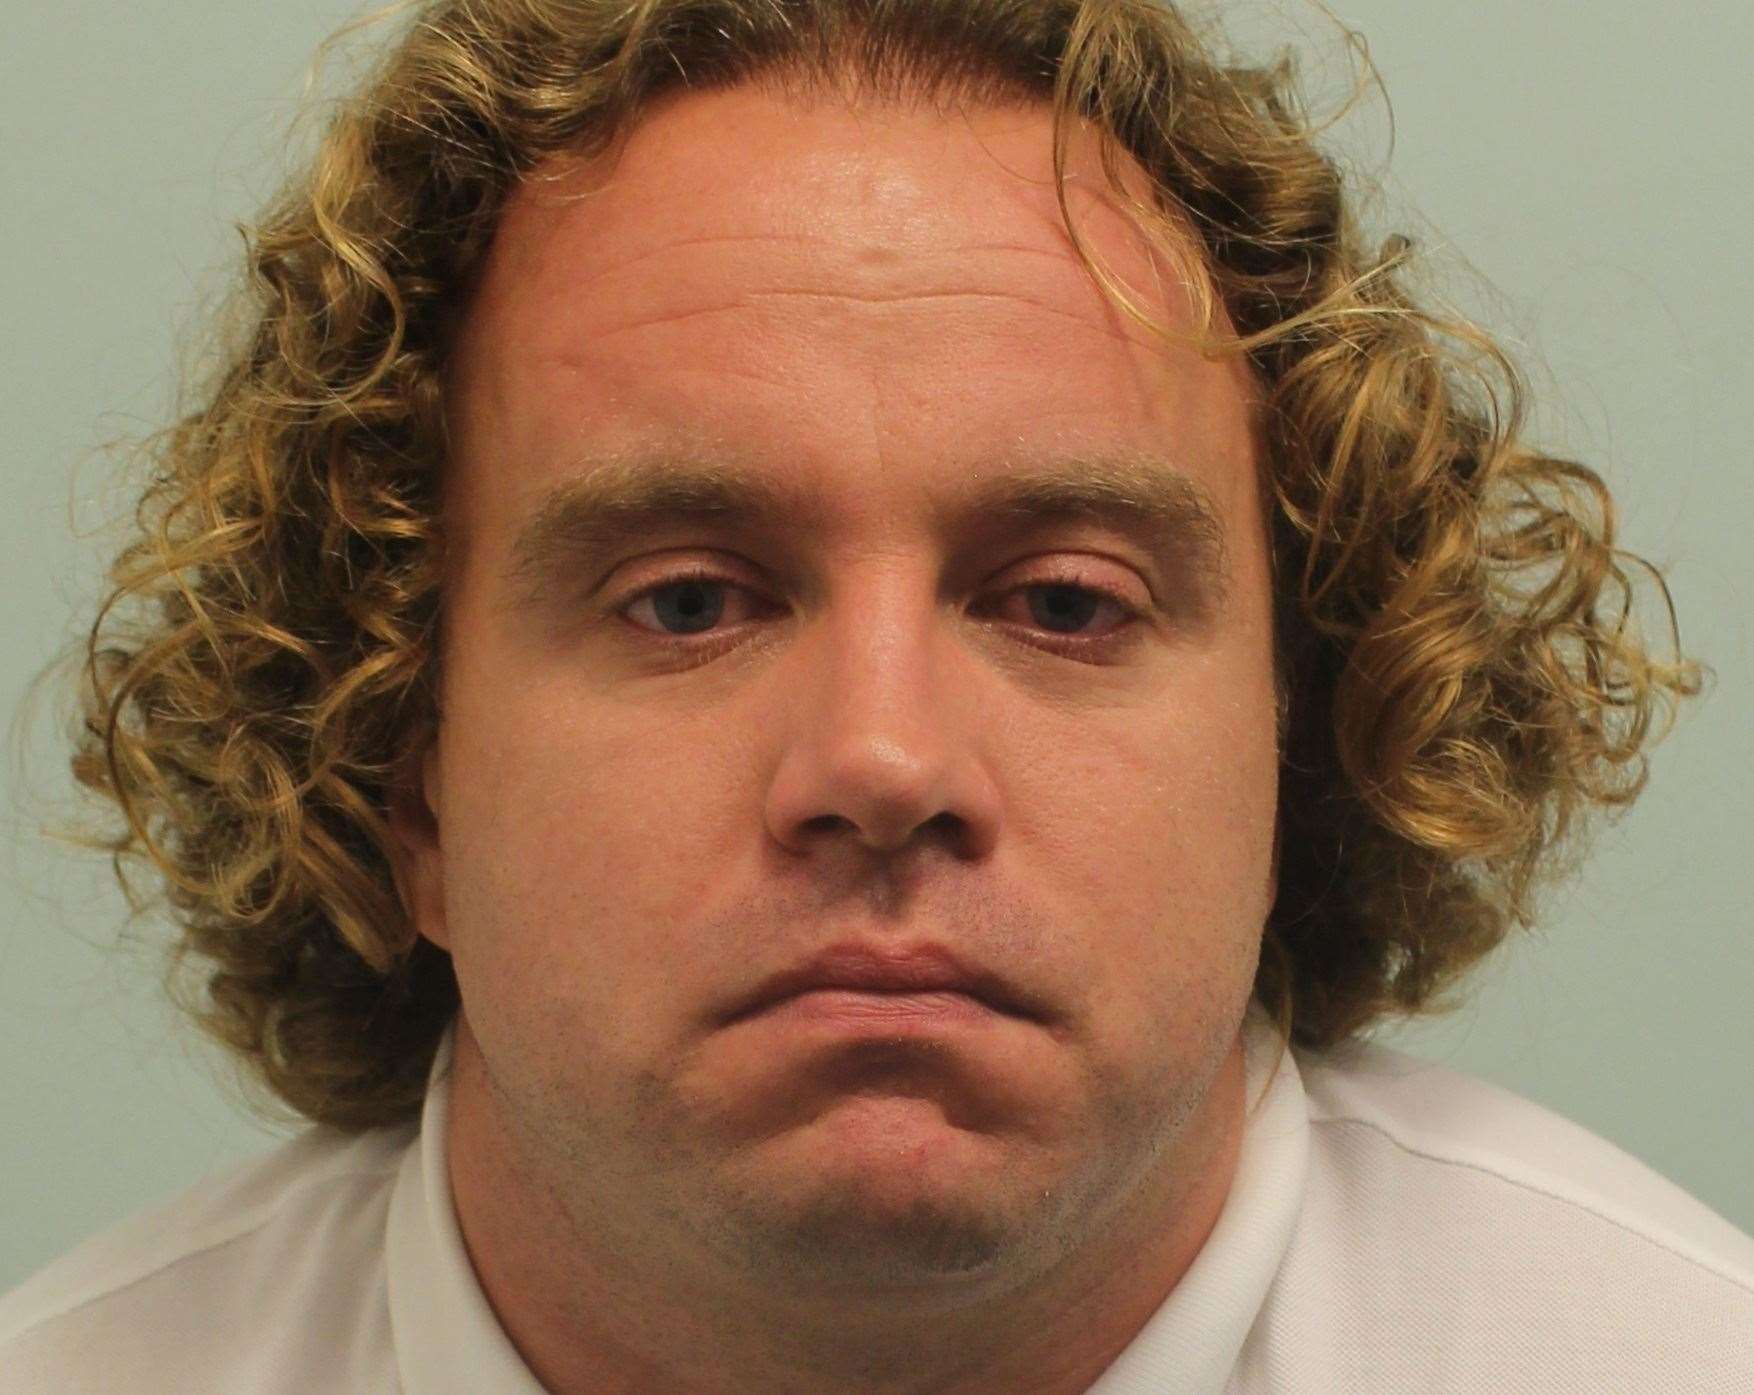 Charles Riddington was found to be living under a fake name for 10 years. He will be sentenced for murder later this month. Picture: Met Police (16174640)